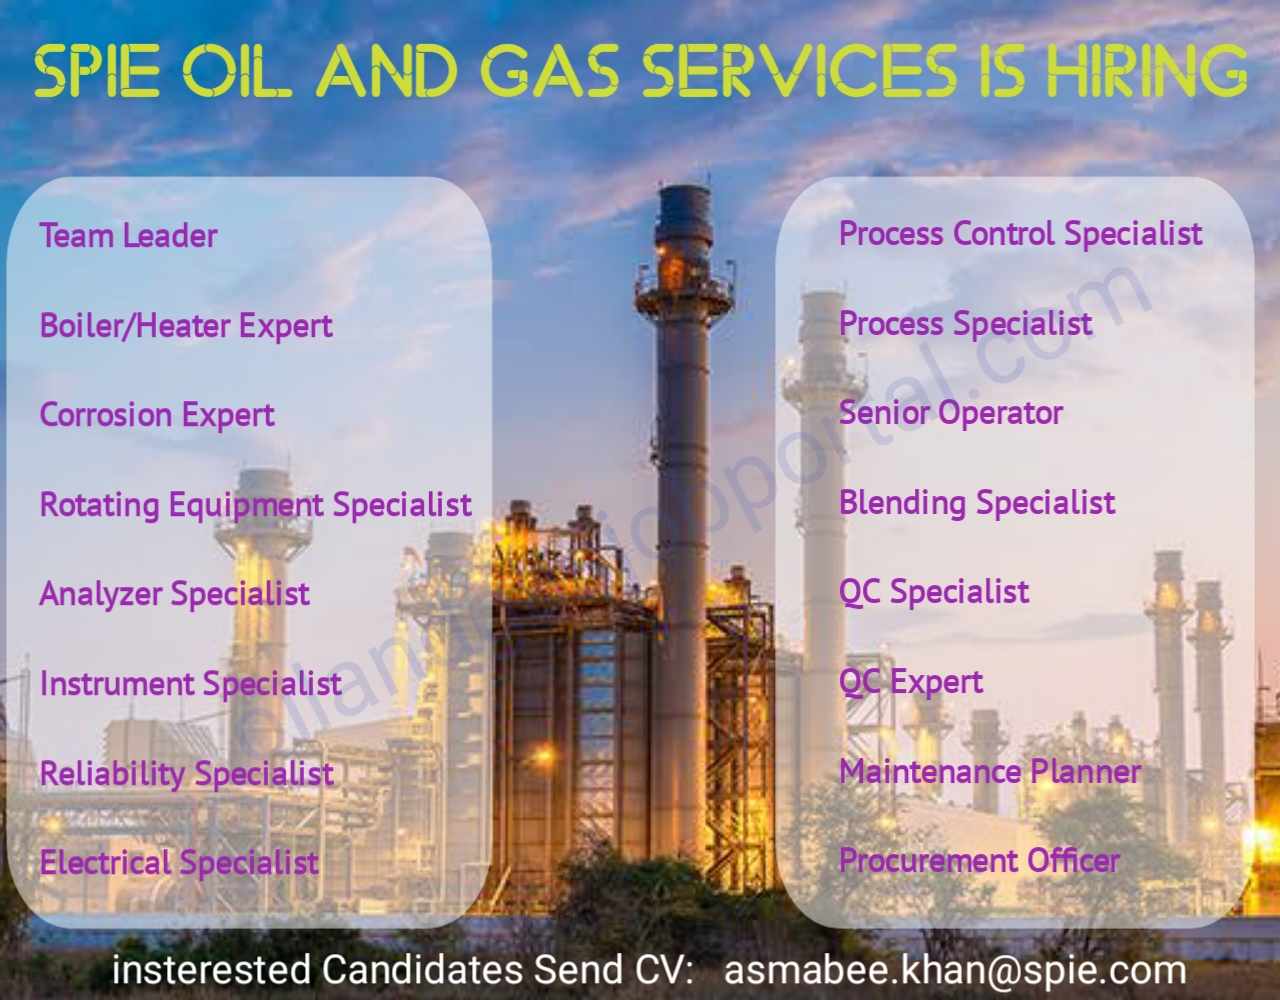 SPIE Oil and Gas Services is hiring Shutdown and Inspection and Start-up of integrated Refinery and Petrochemical